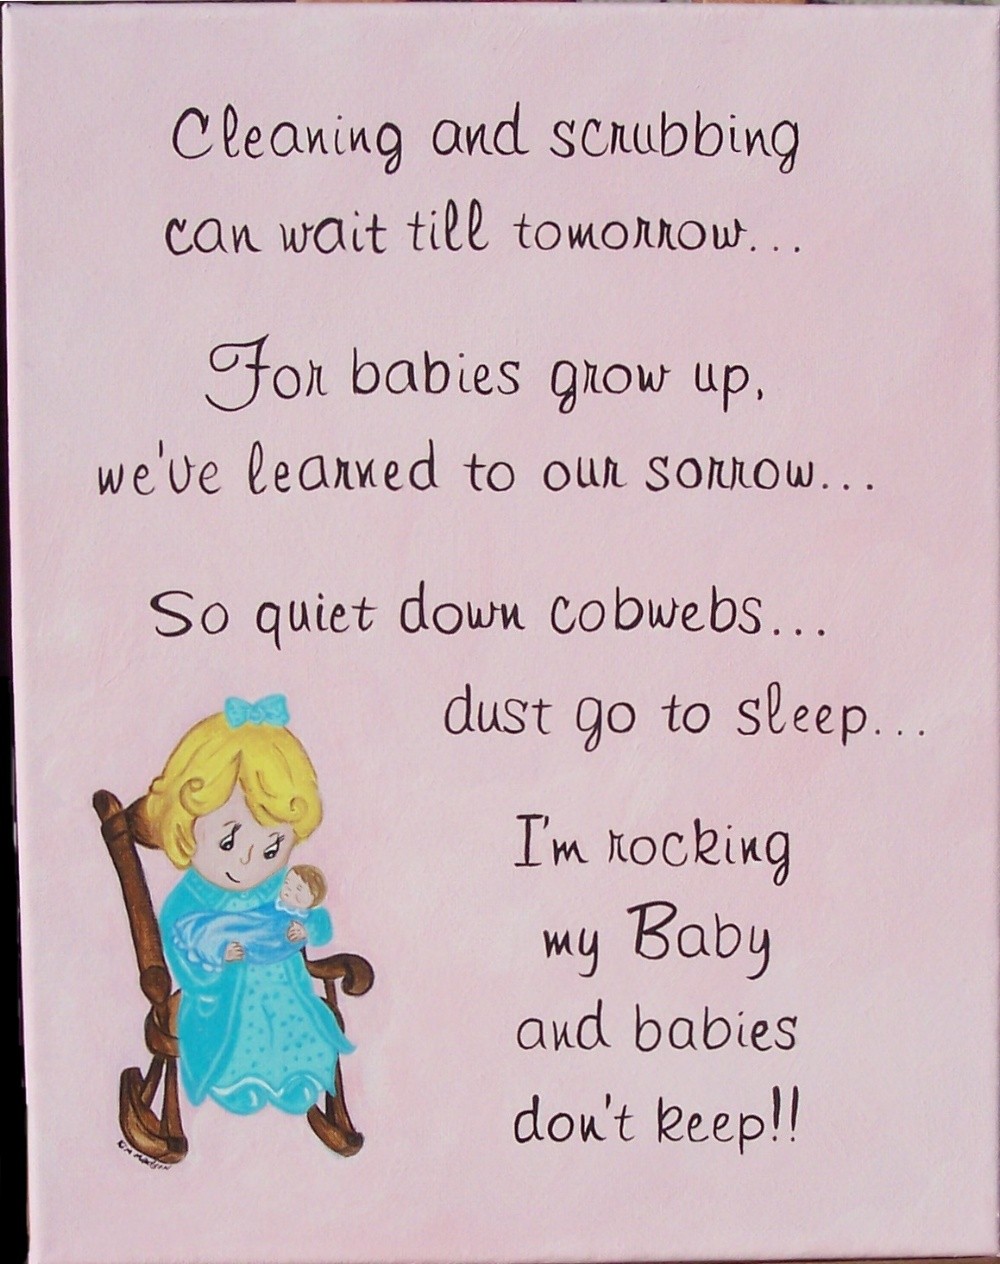 Baby Boy Poems And Quotes. QuotesGram